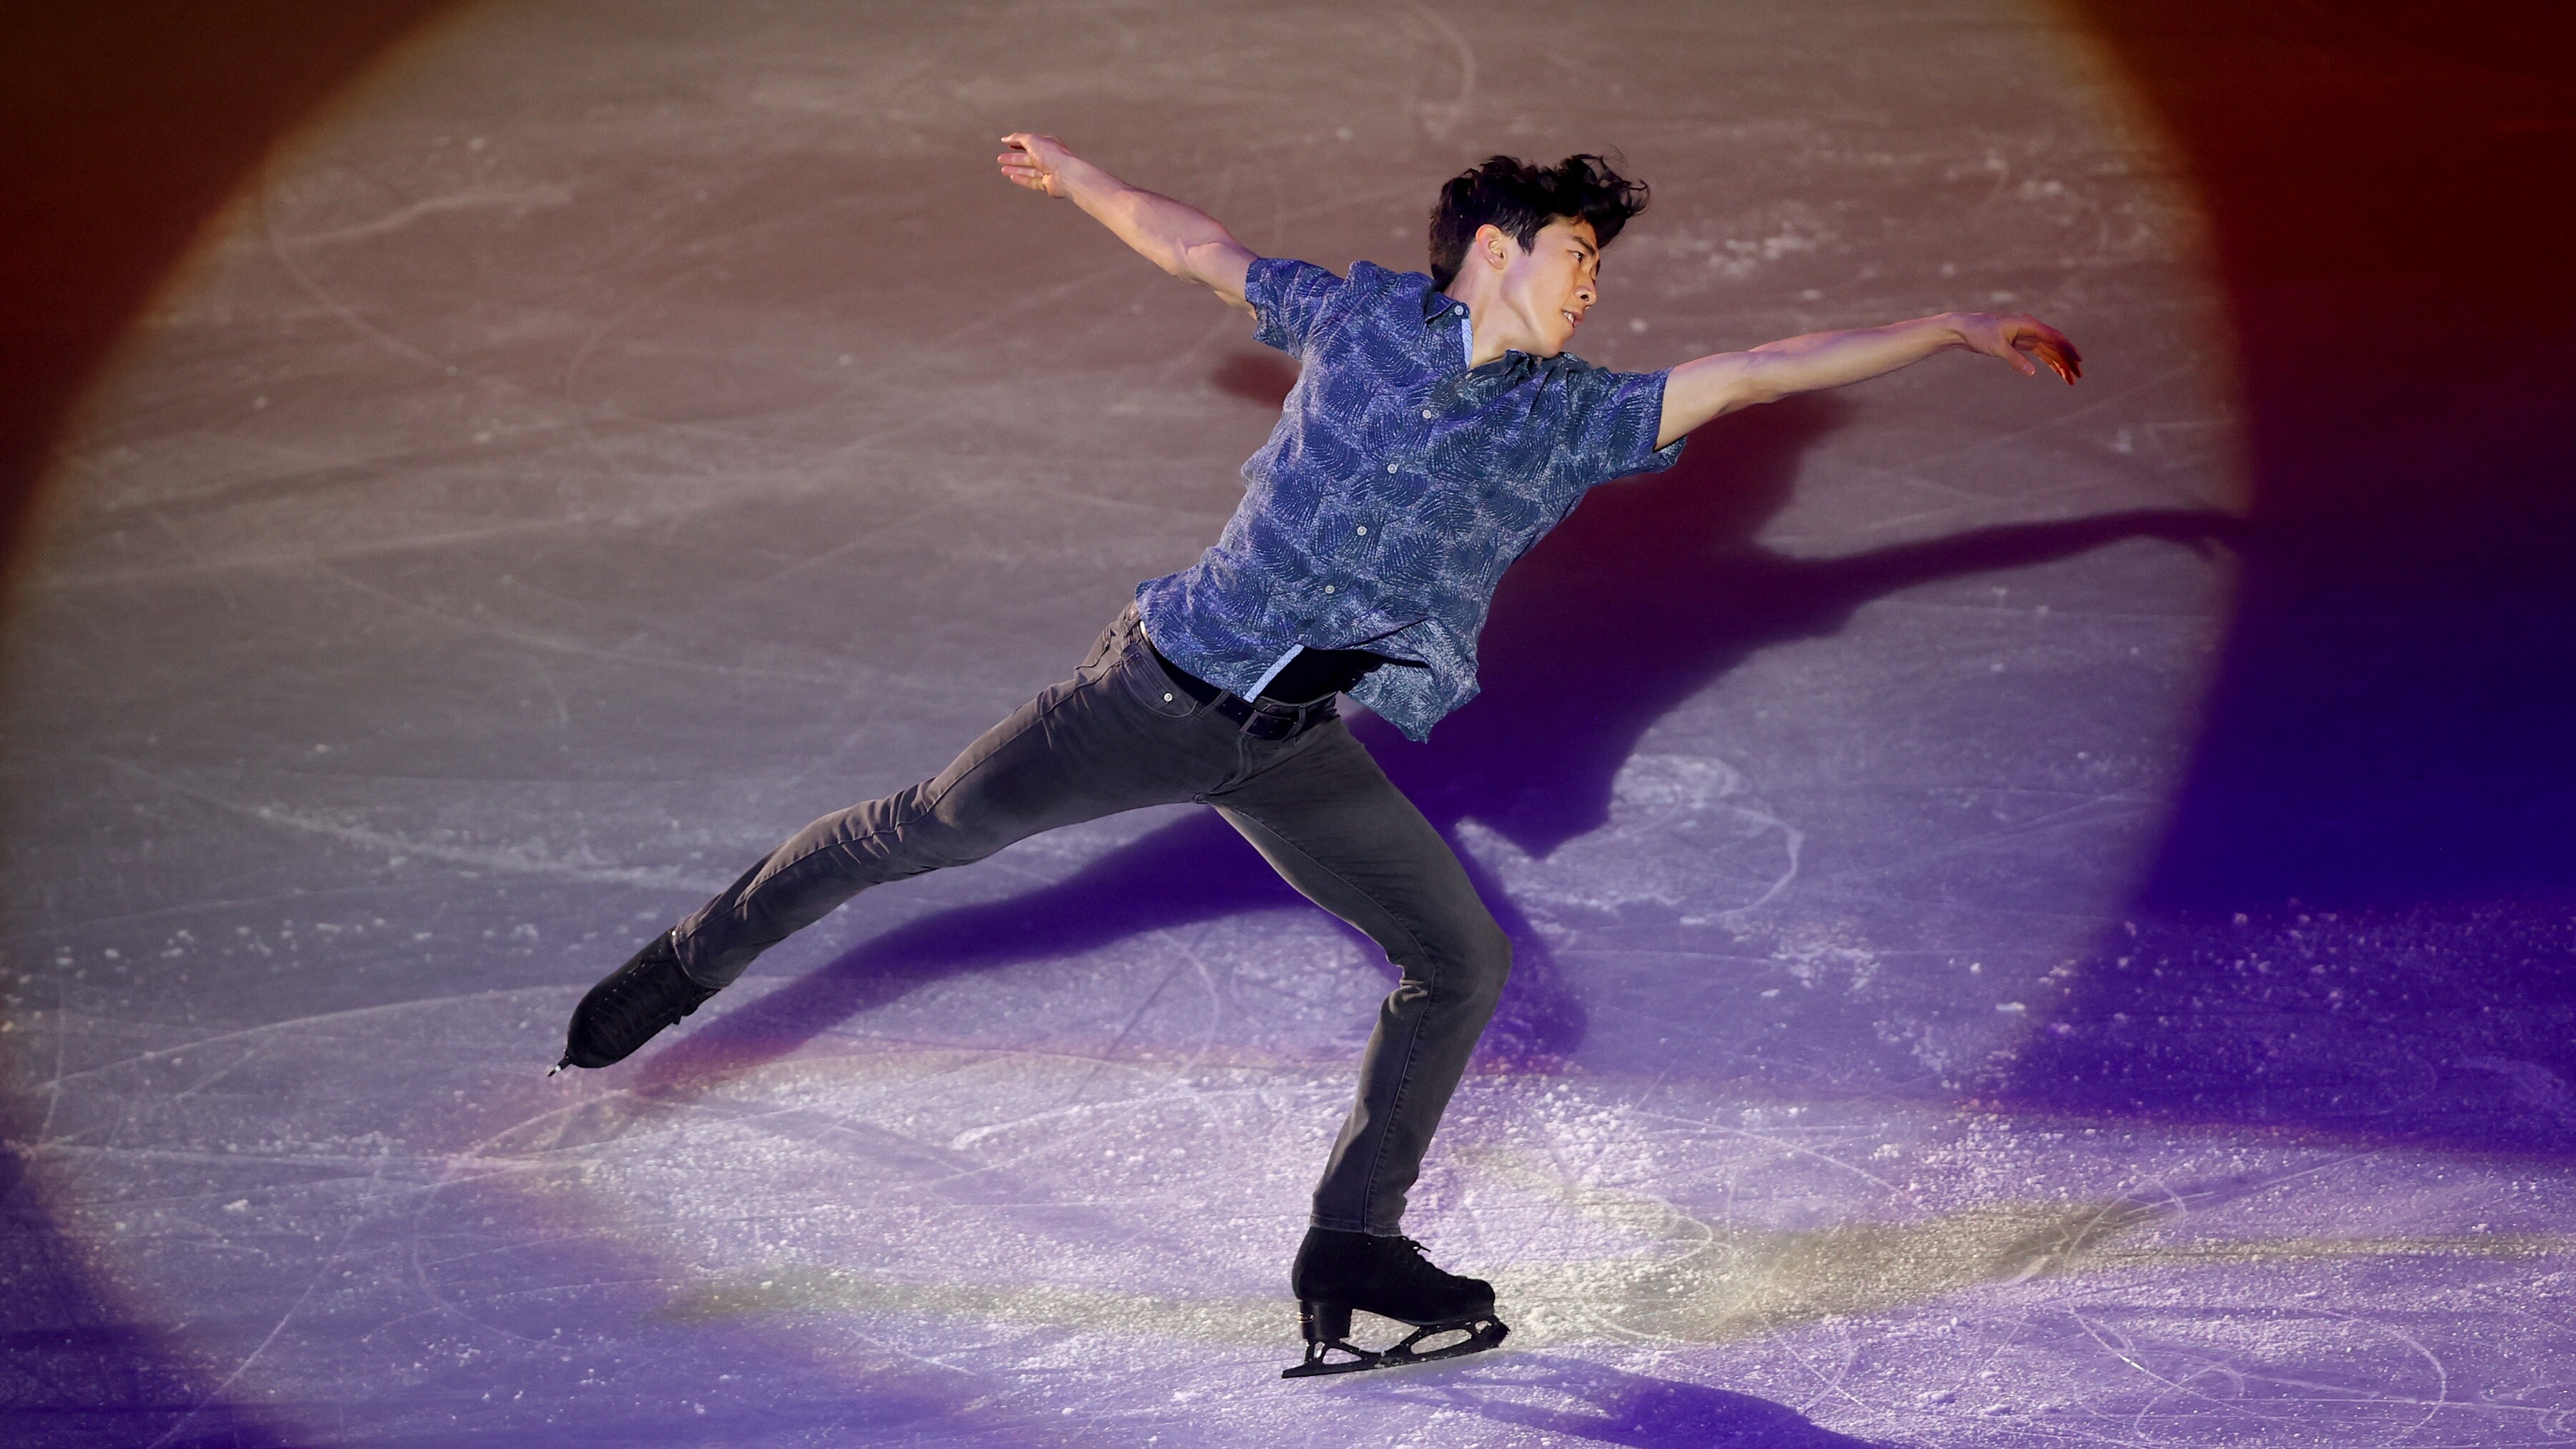 Single Skating: Nathan Chen, An American figure skater, The 2022 Olympic champion, A three-time World champion. 3600x2030 HD Wallpaper.